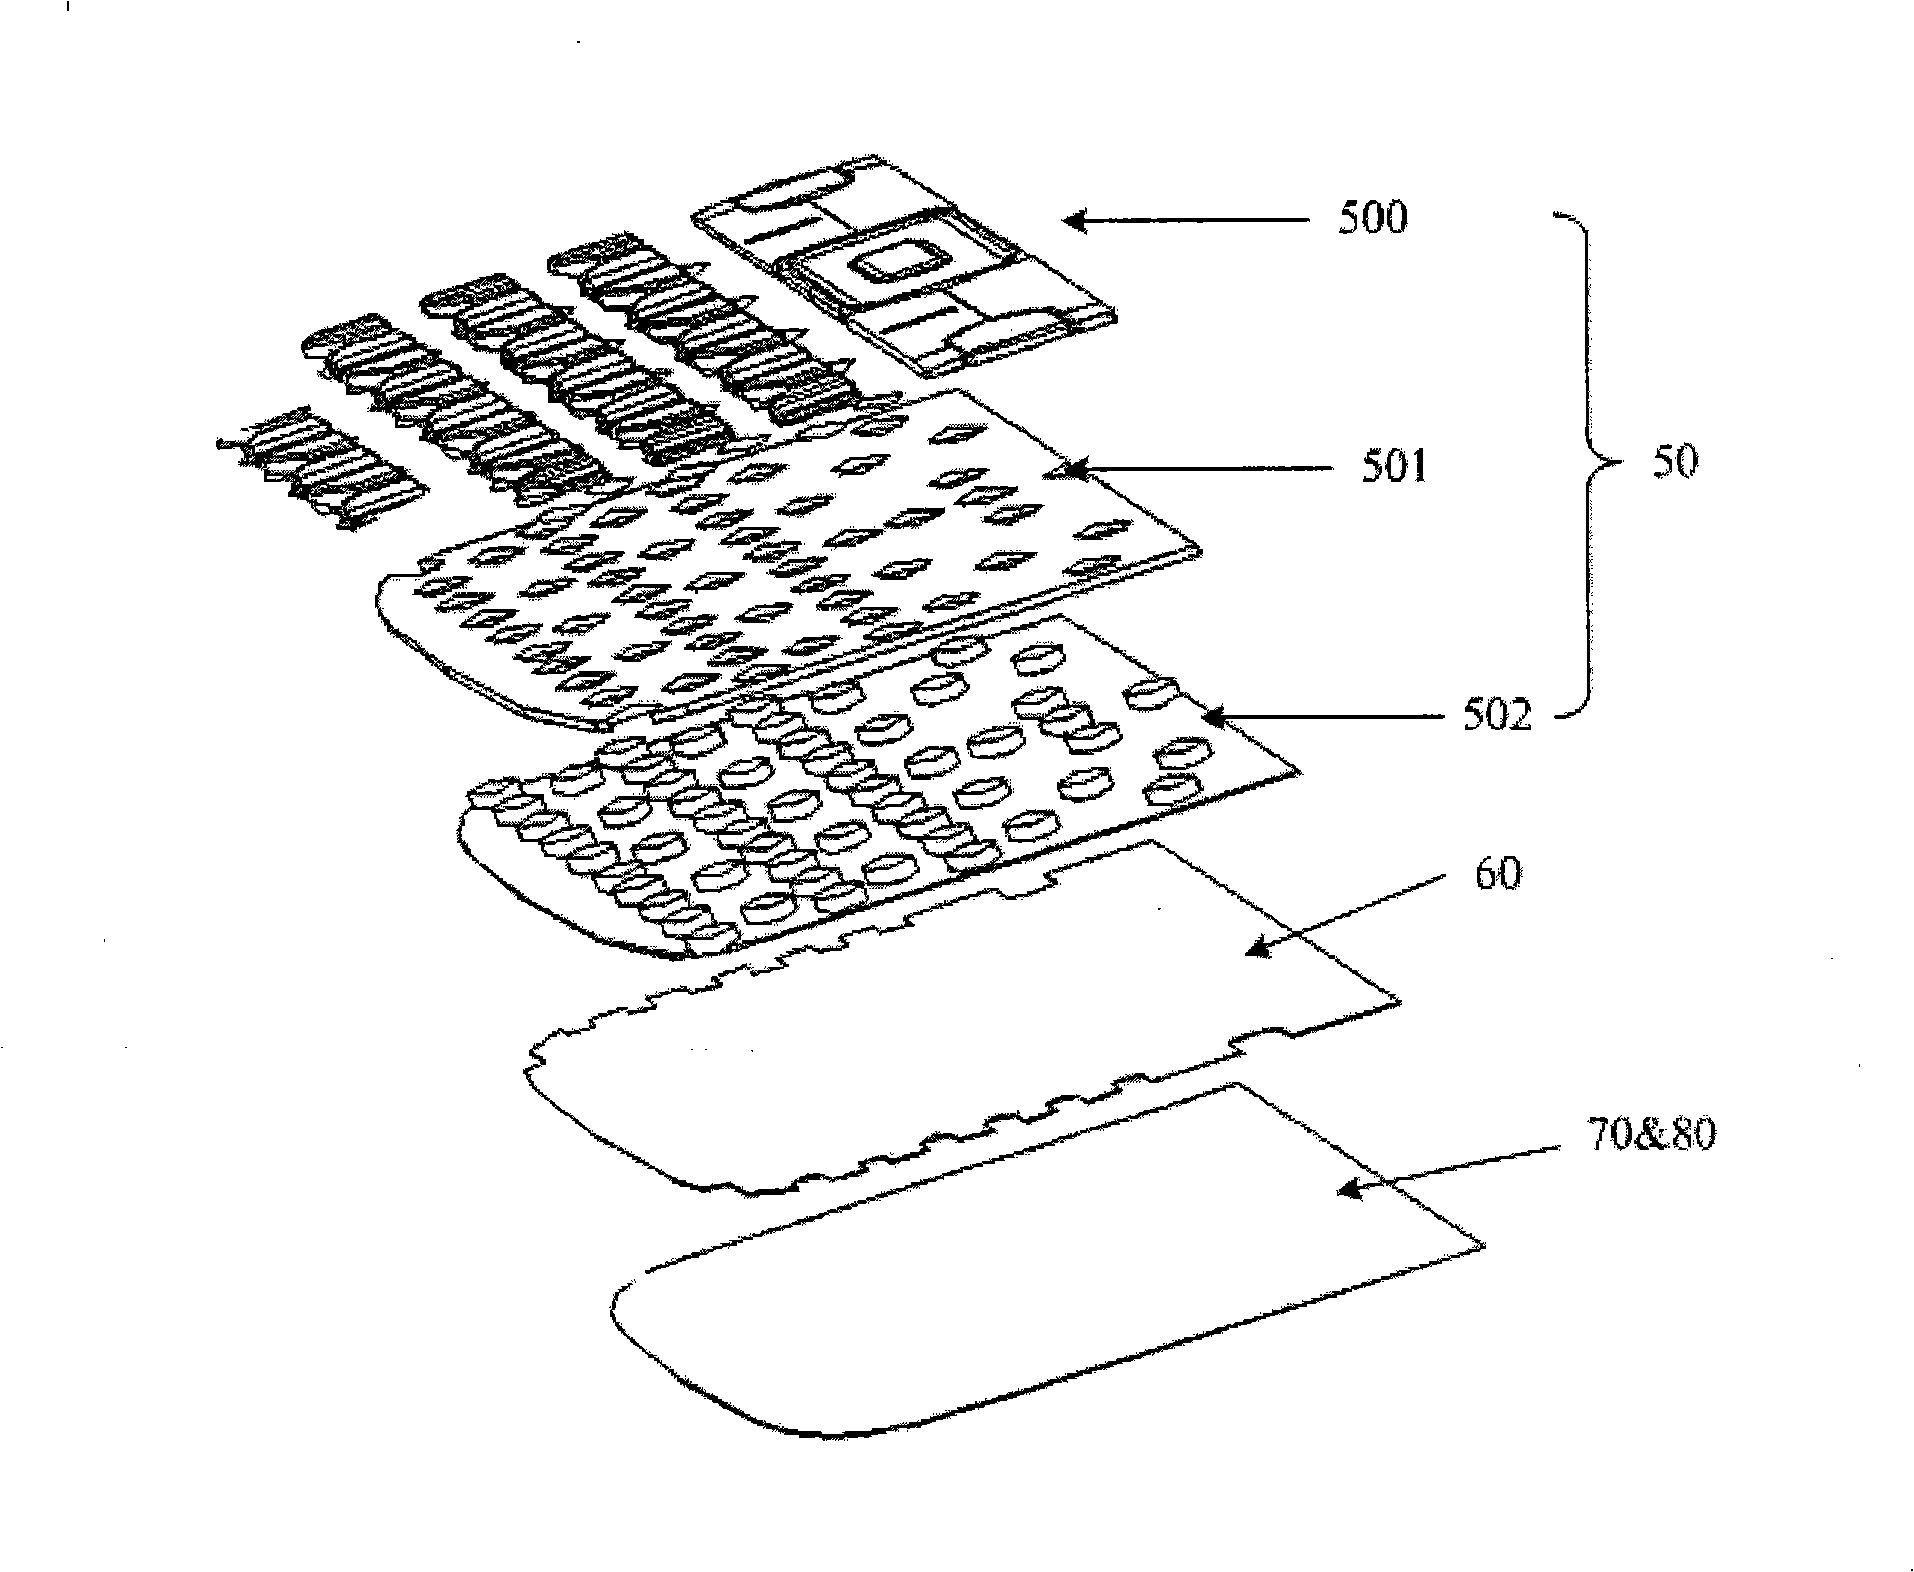 Keyboard device for handhold equipment capable of lighting with various areas